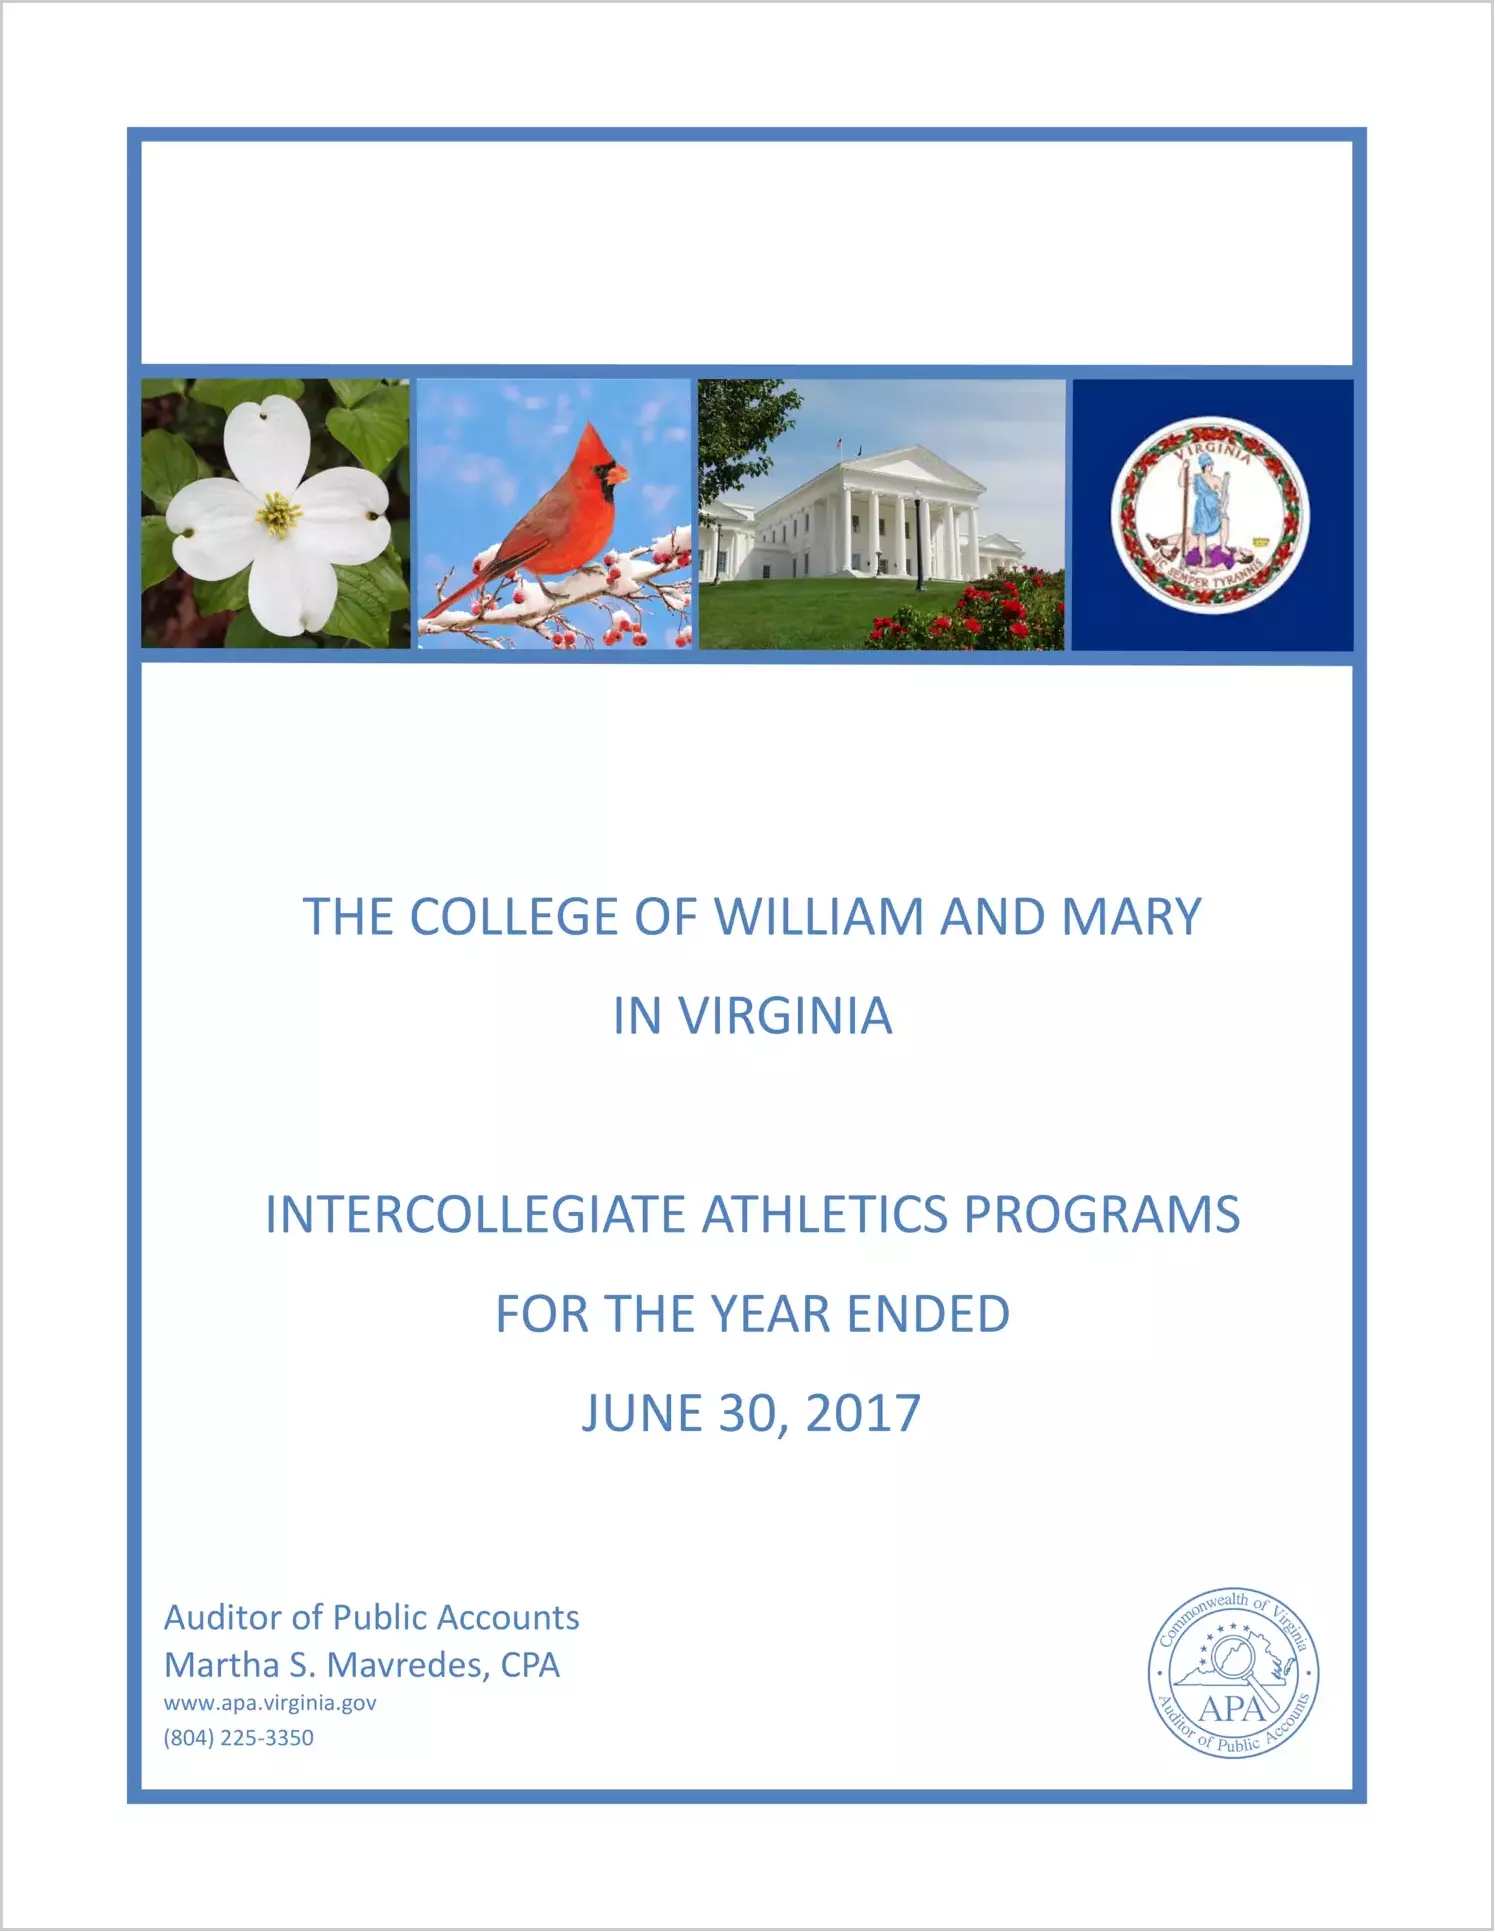 The College of William and Mary in Virginia Intercollegiate Athletics Programs for the year ended June 30, 2017